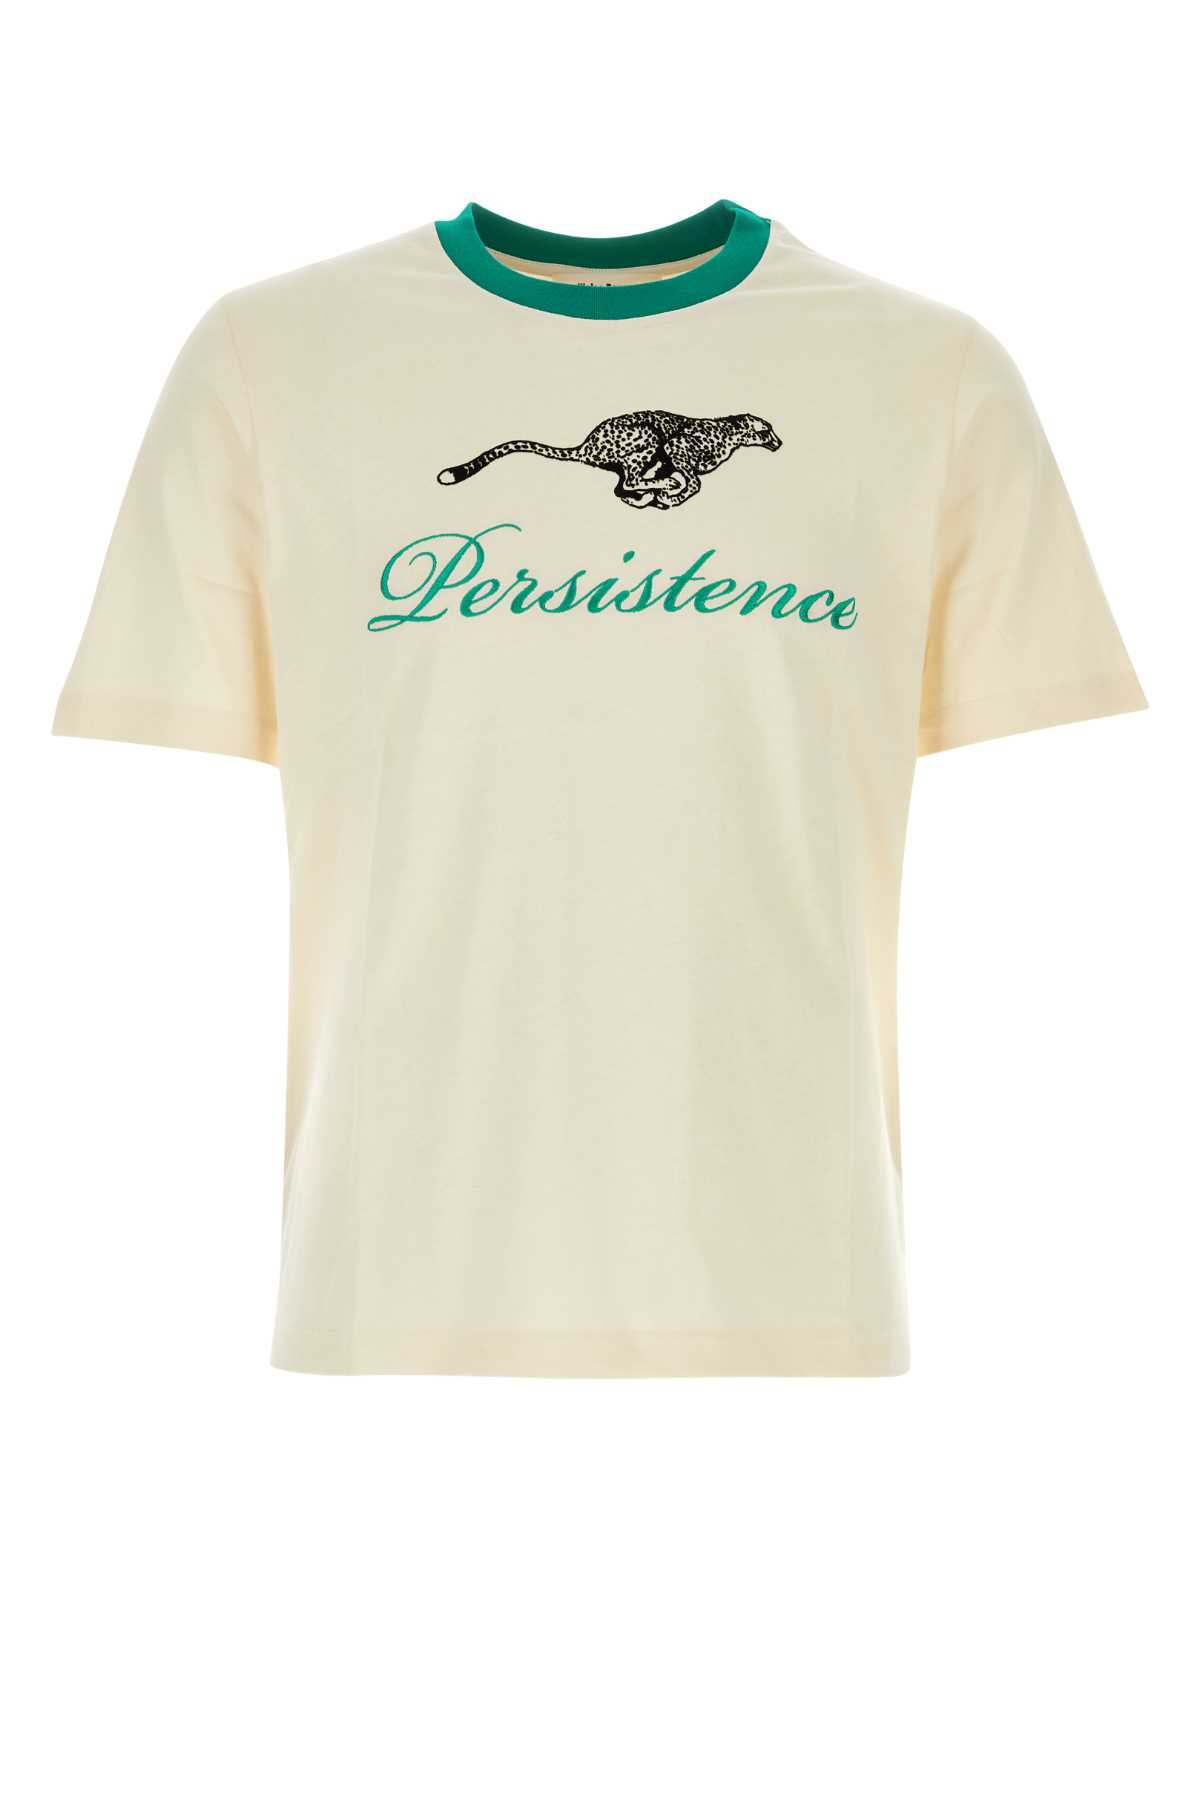 Shop Wales Bonner Cream Cotton Resilience T-shirt In Ivory